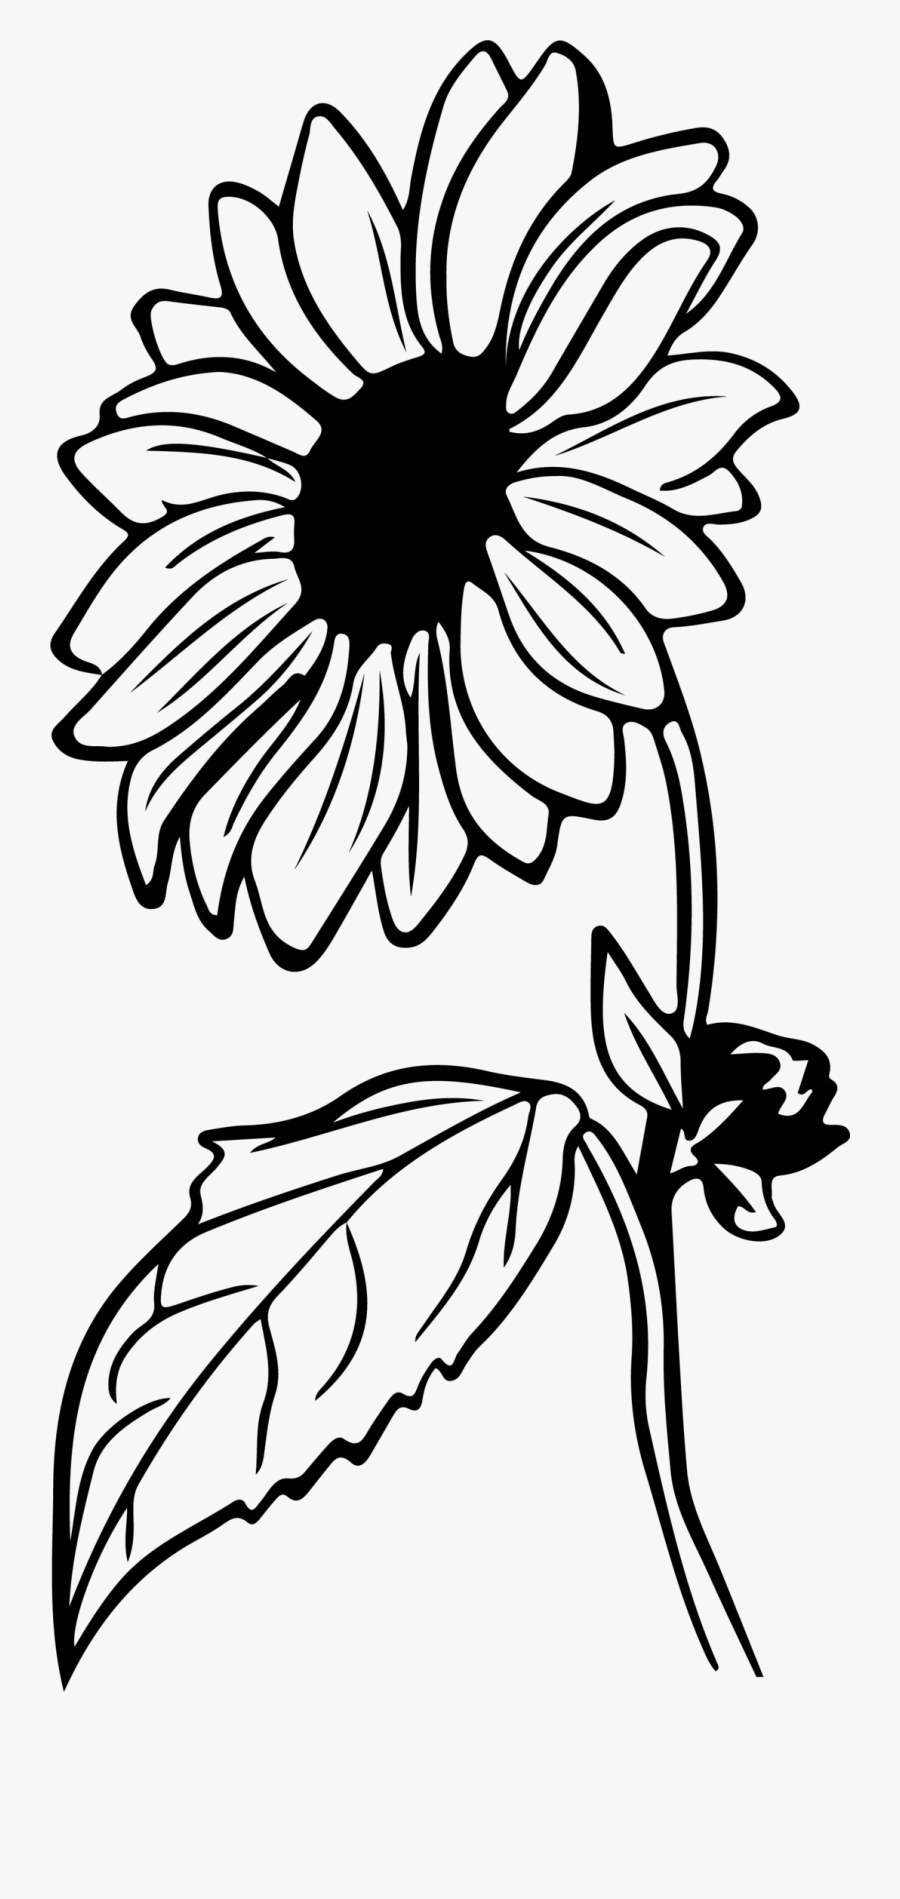 Sunflower Clip Art Black And White Free Transparent Clipart